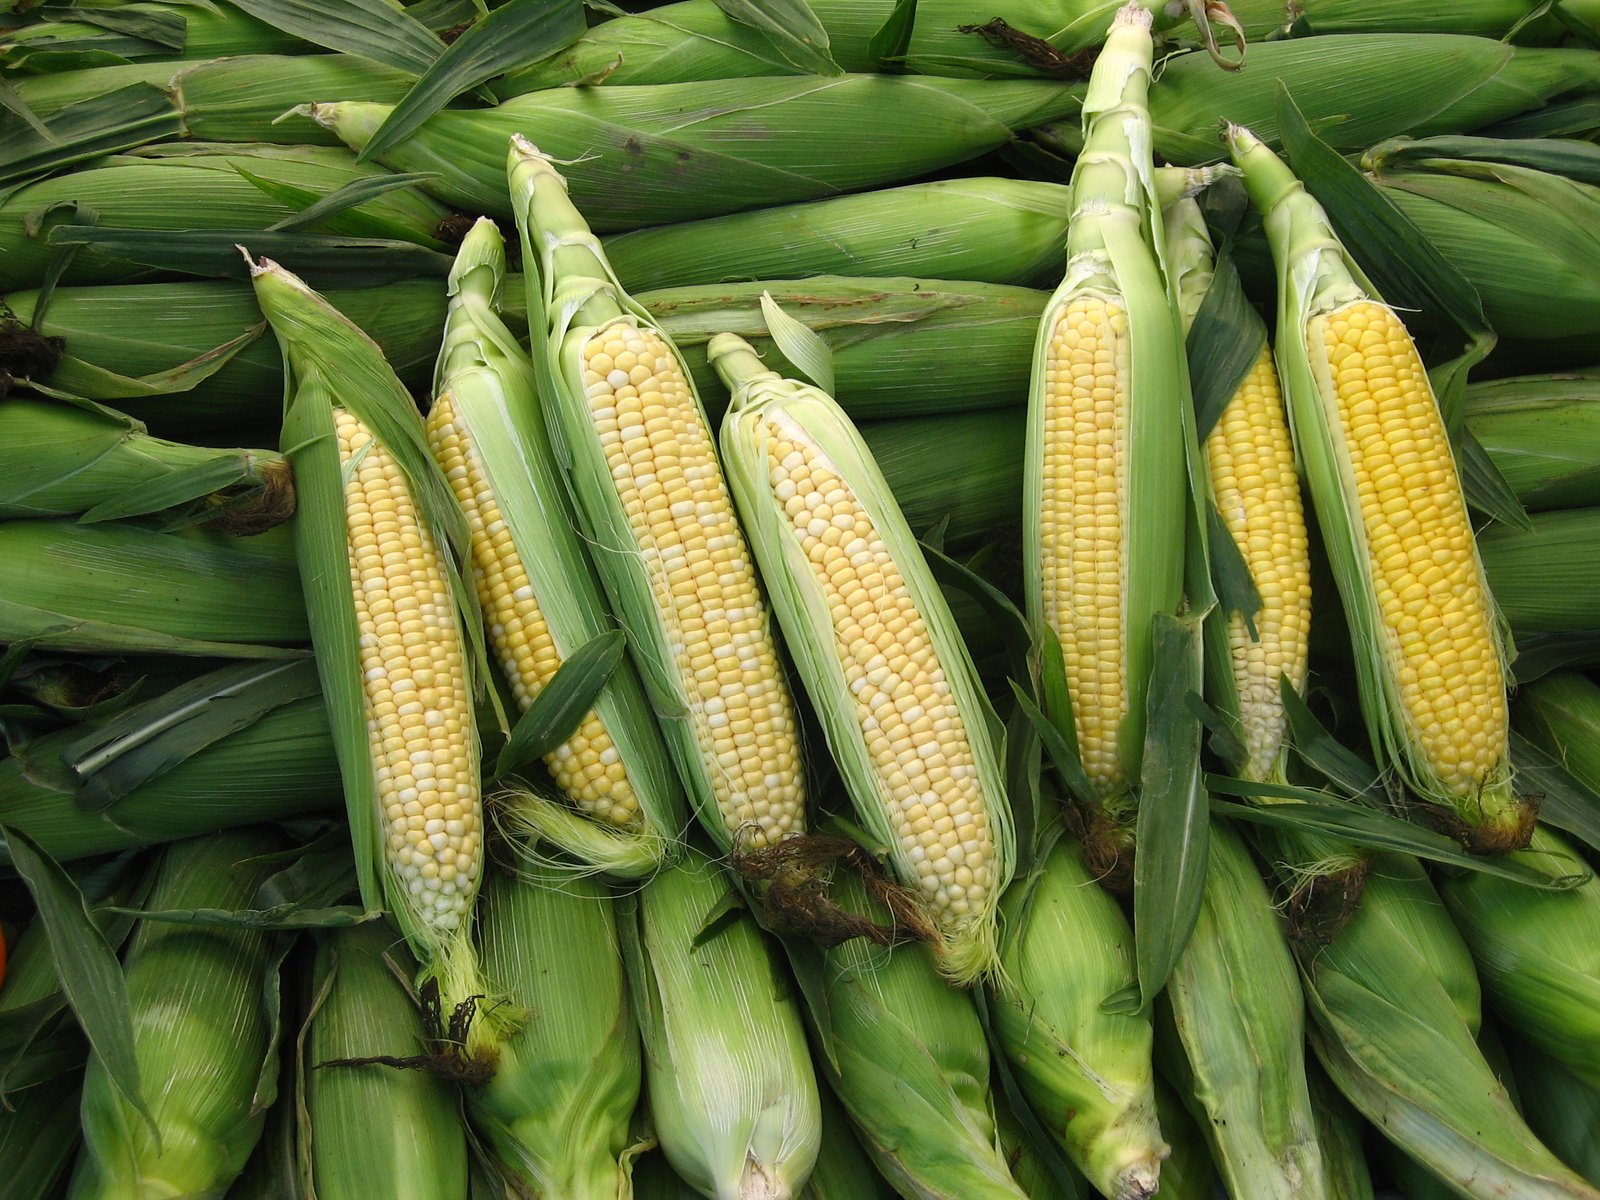 a bunch of corn on a pile of green leafy stalks